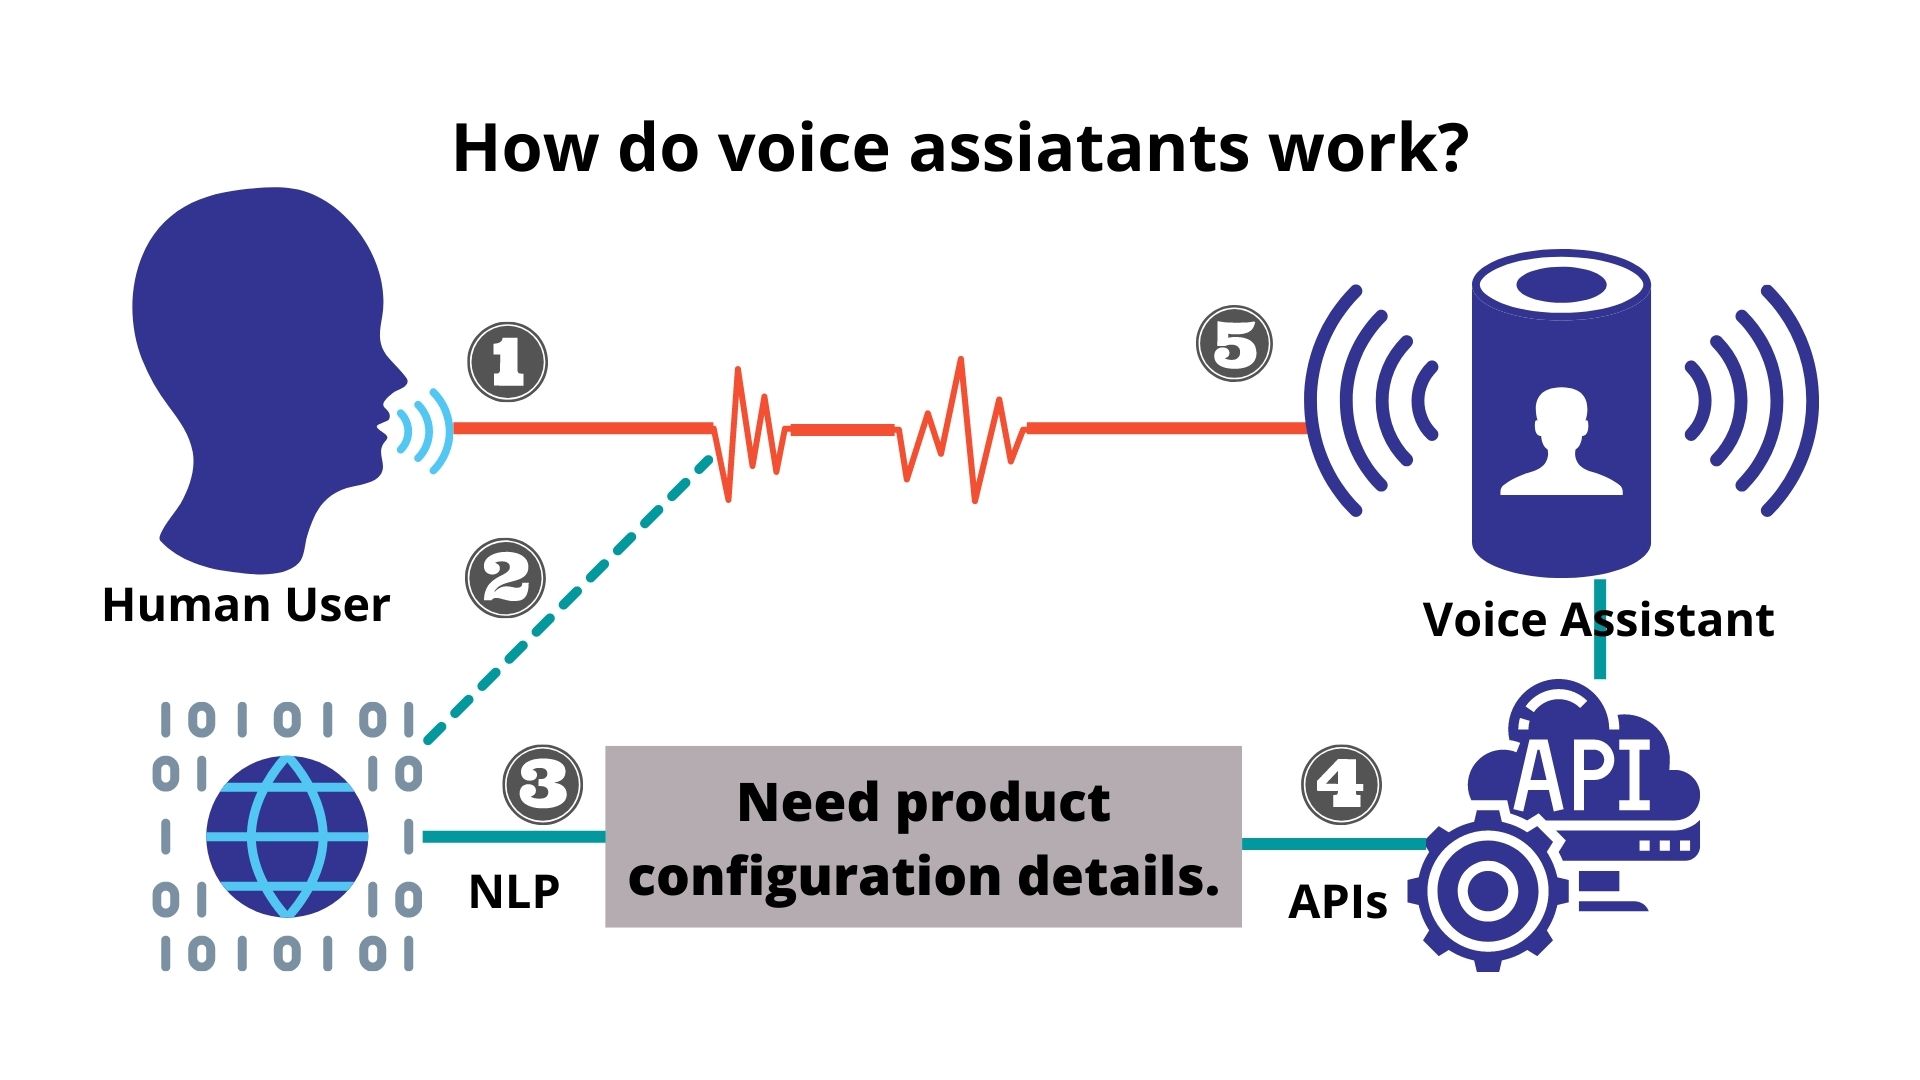 How does a voice assistant work?